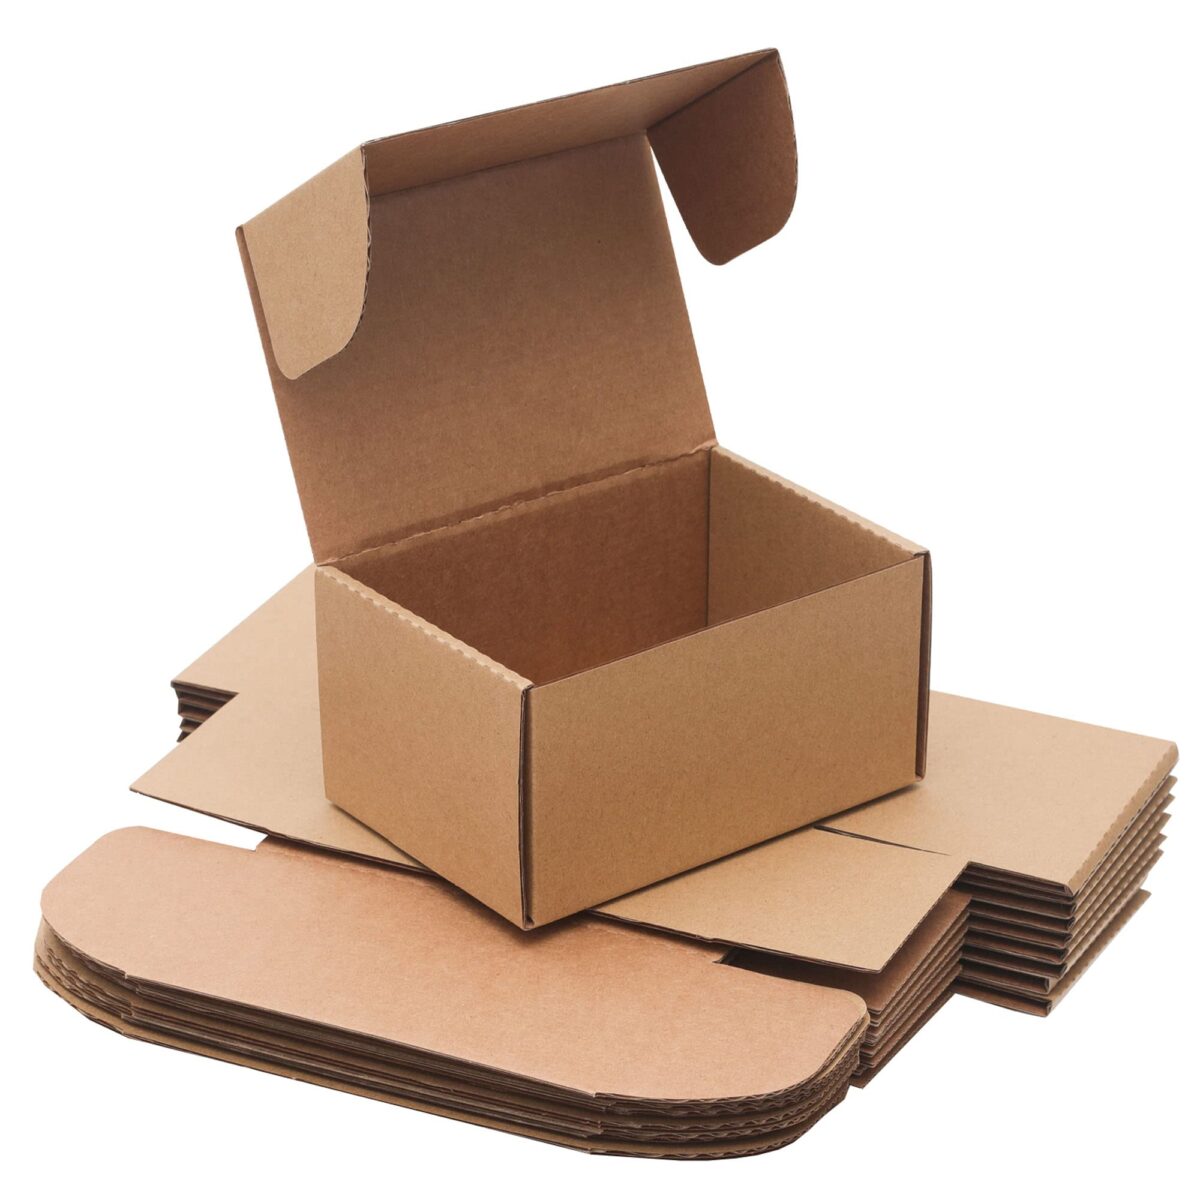 The Adaptability and Significance of Cardboard Boxes in Current Packaging